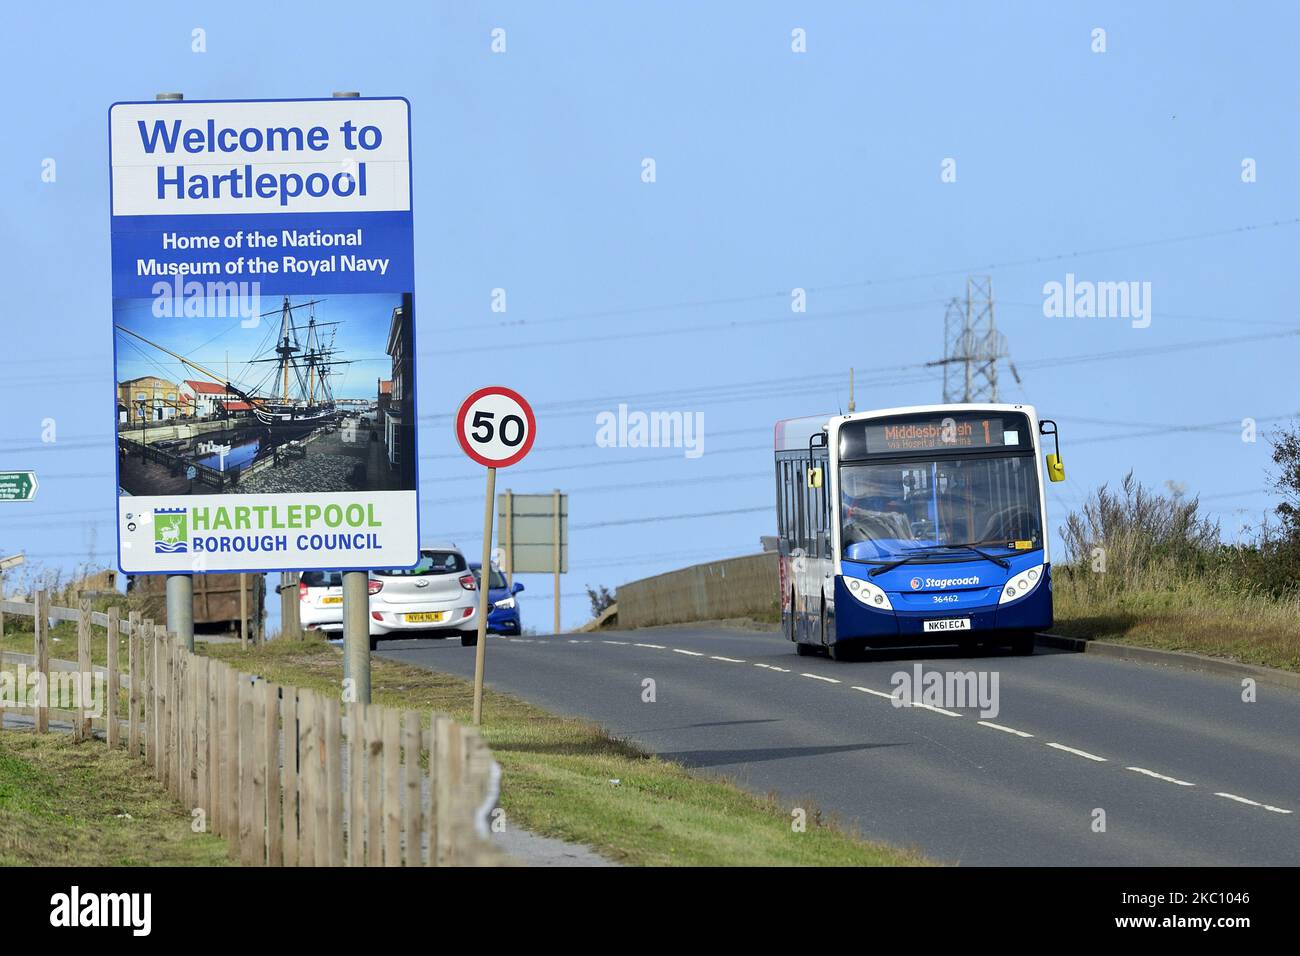 Welcome to Hartlepool sign in Hartlepool, County Durham, England on October 1, 2020. The town has today been placed into a localised lockdown by the UK Government in response to an exponential rise COVID-19 cases. (Photo by Tom Collins/MI News/NurPhoto) Stock Photo